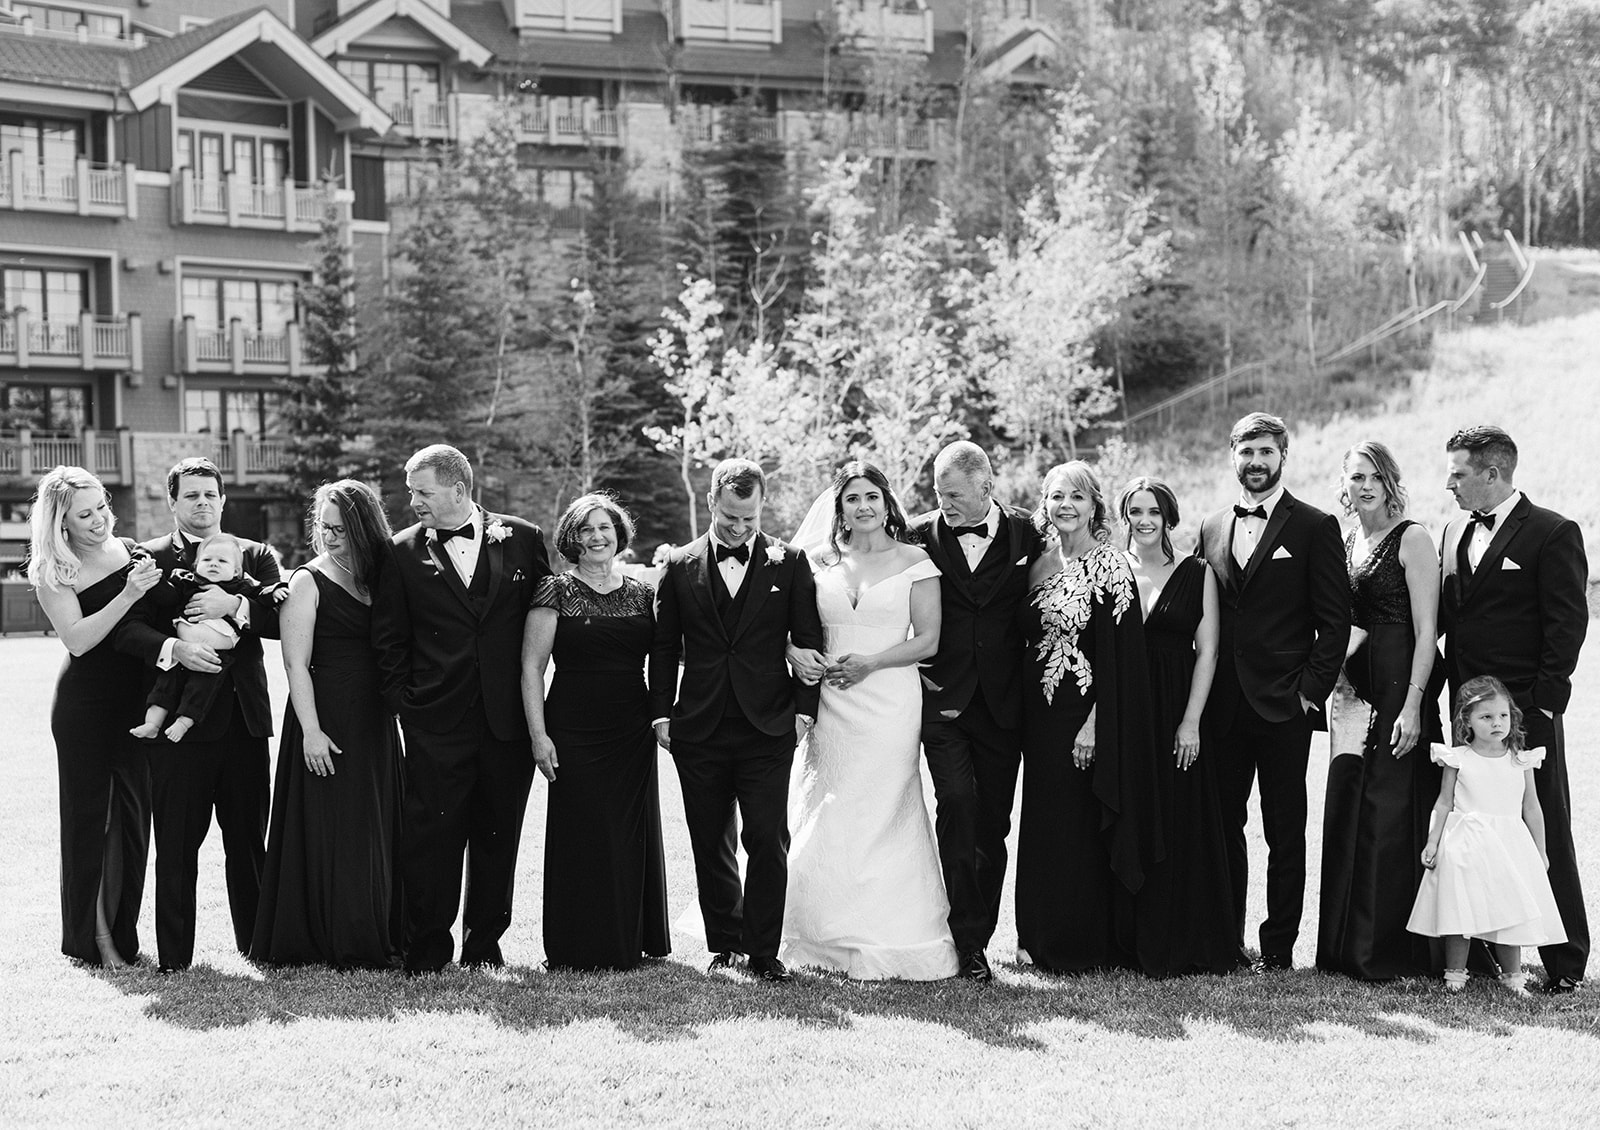 a family photo taken during a wedding at montage deer valley in park city utah. photo by megan robinson photography